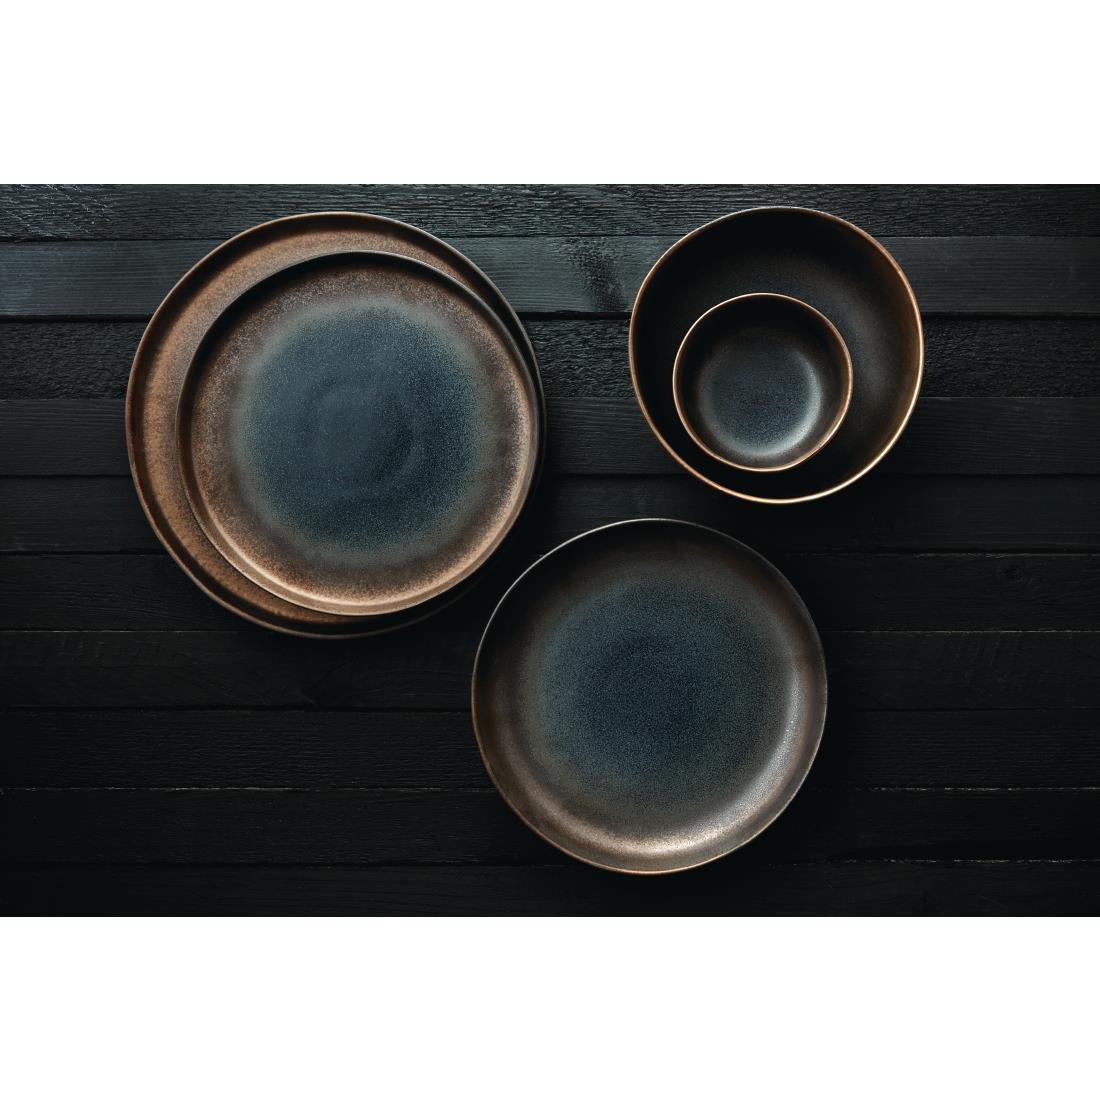 Olympia Ochre Flat Plates 220mm (Pack of 6) - FC286  - 6